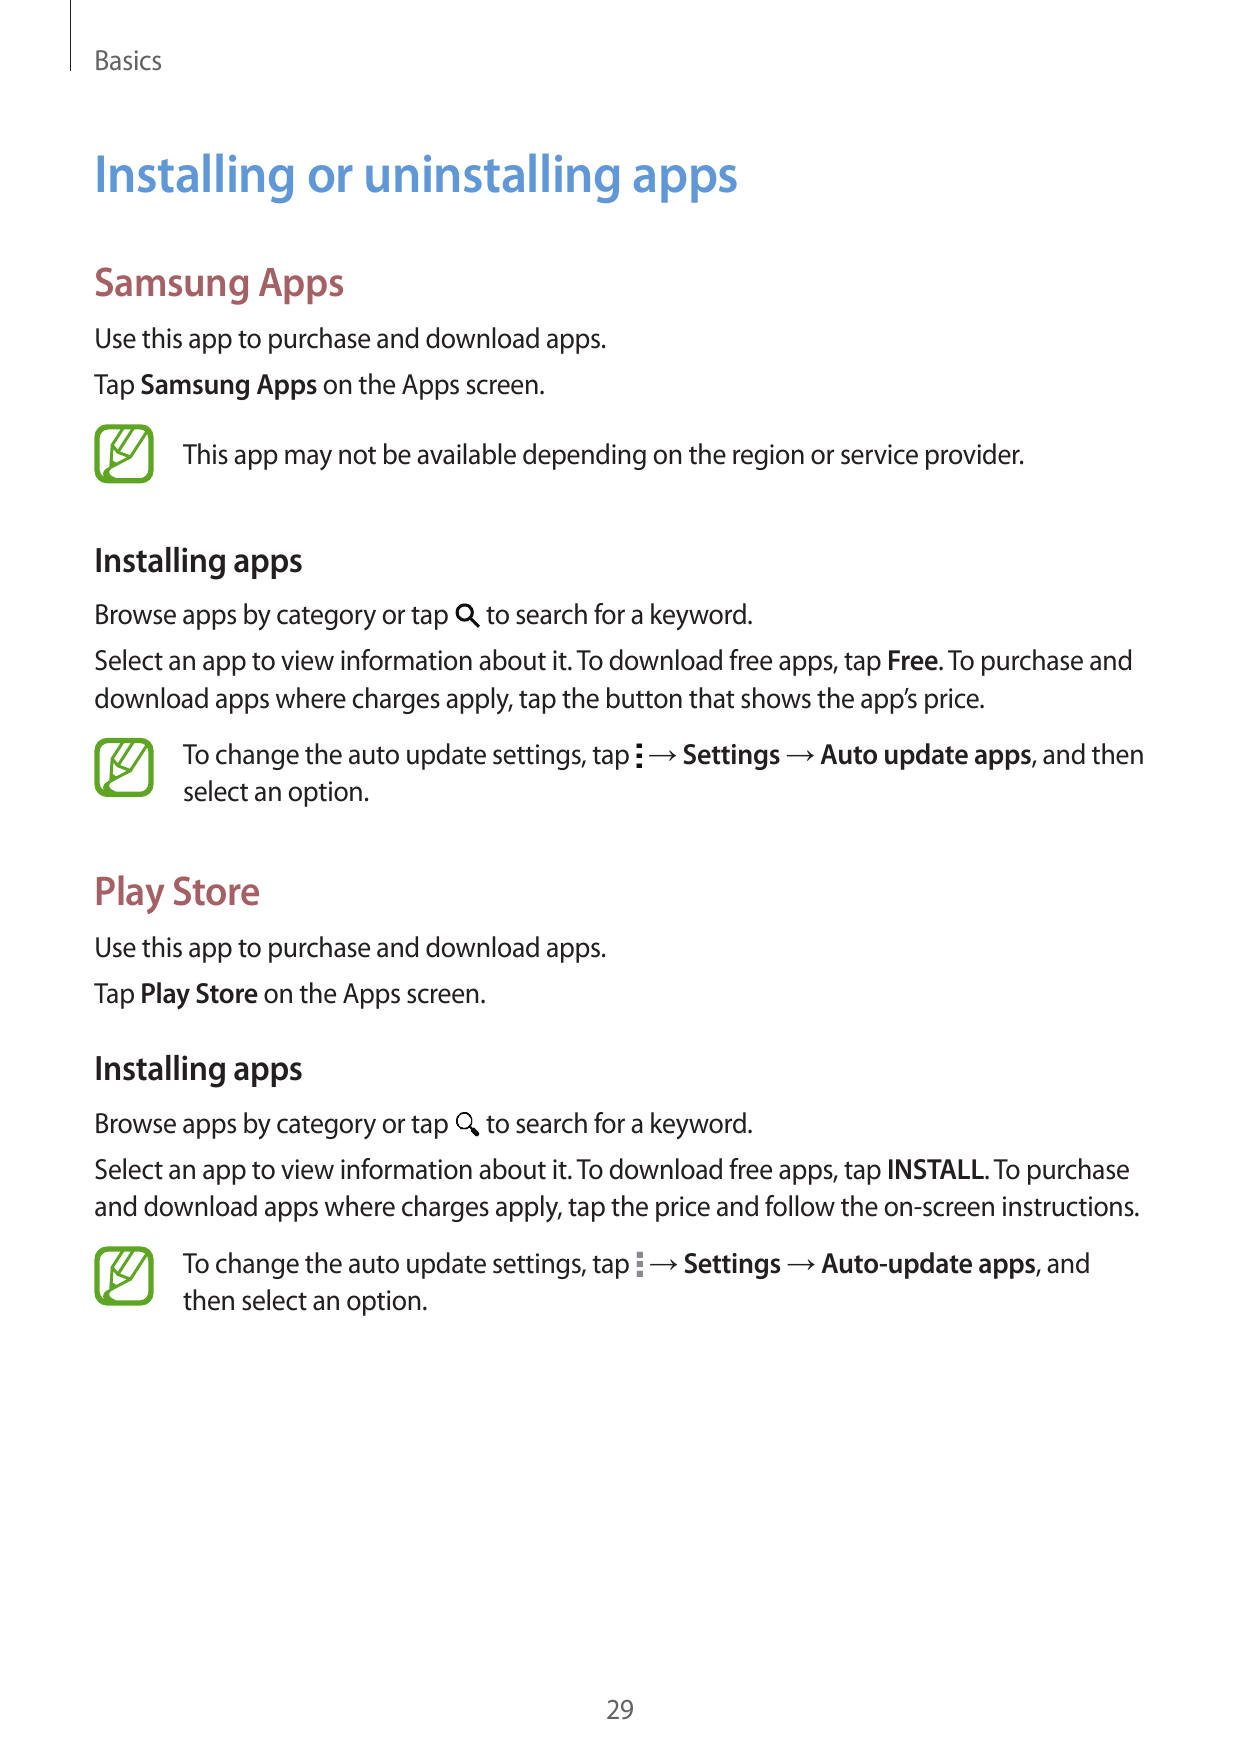 BasicsInstalling or uninstalling appsSamsung AppsUse this app to purchase and download apps.Tap Samsung Apps on the Apps screen.